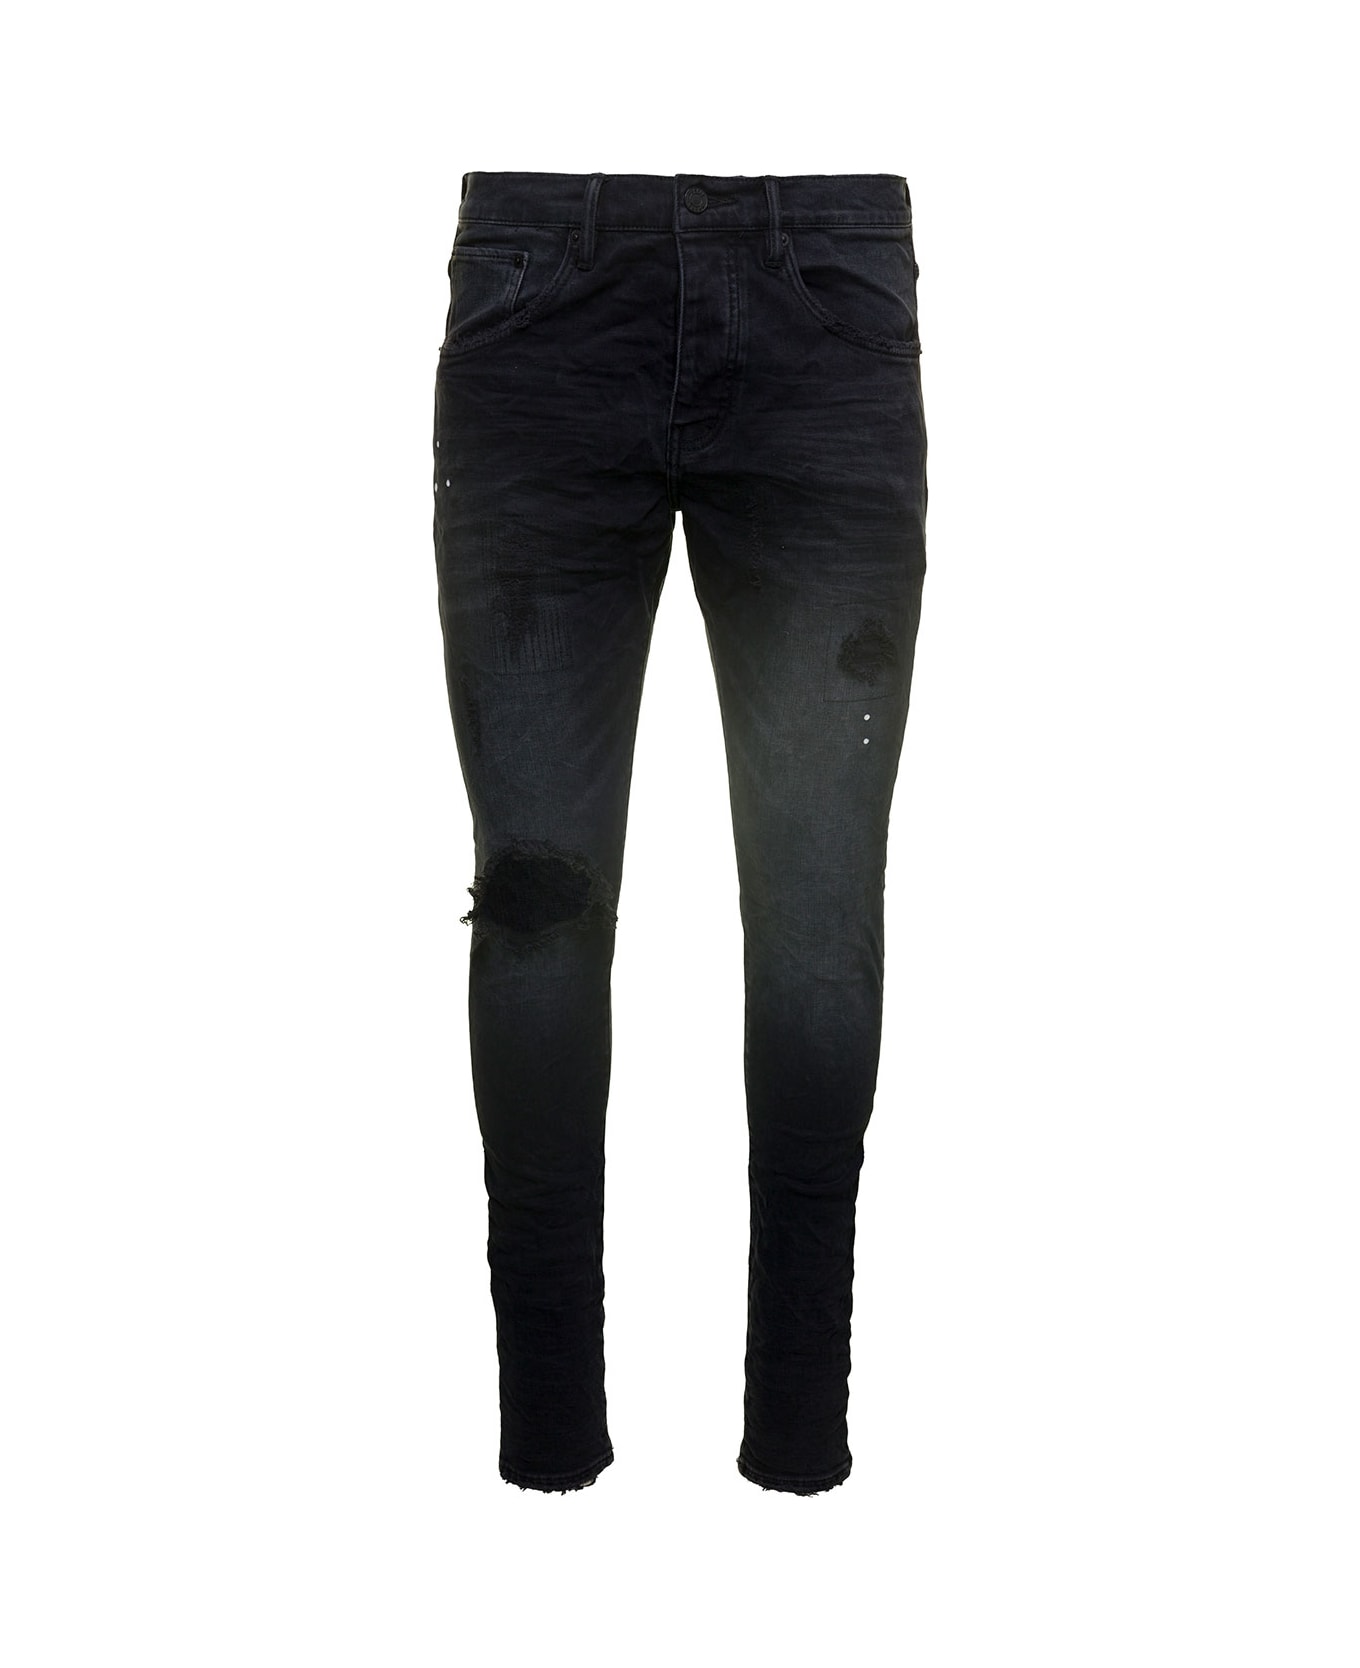 Purple Brand Black Five-pocket Style Jeans With Rips Detail In Stretch Cotton Denim Man - BLACK デニム